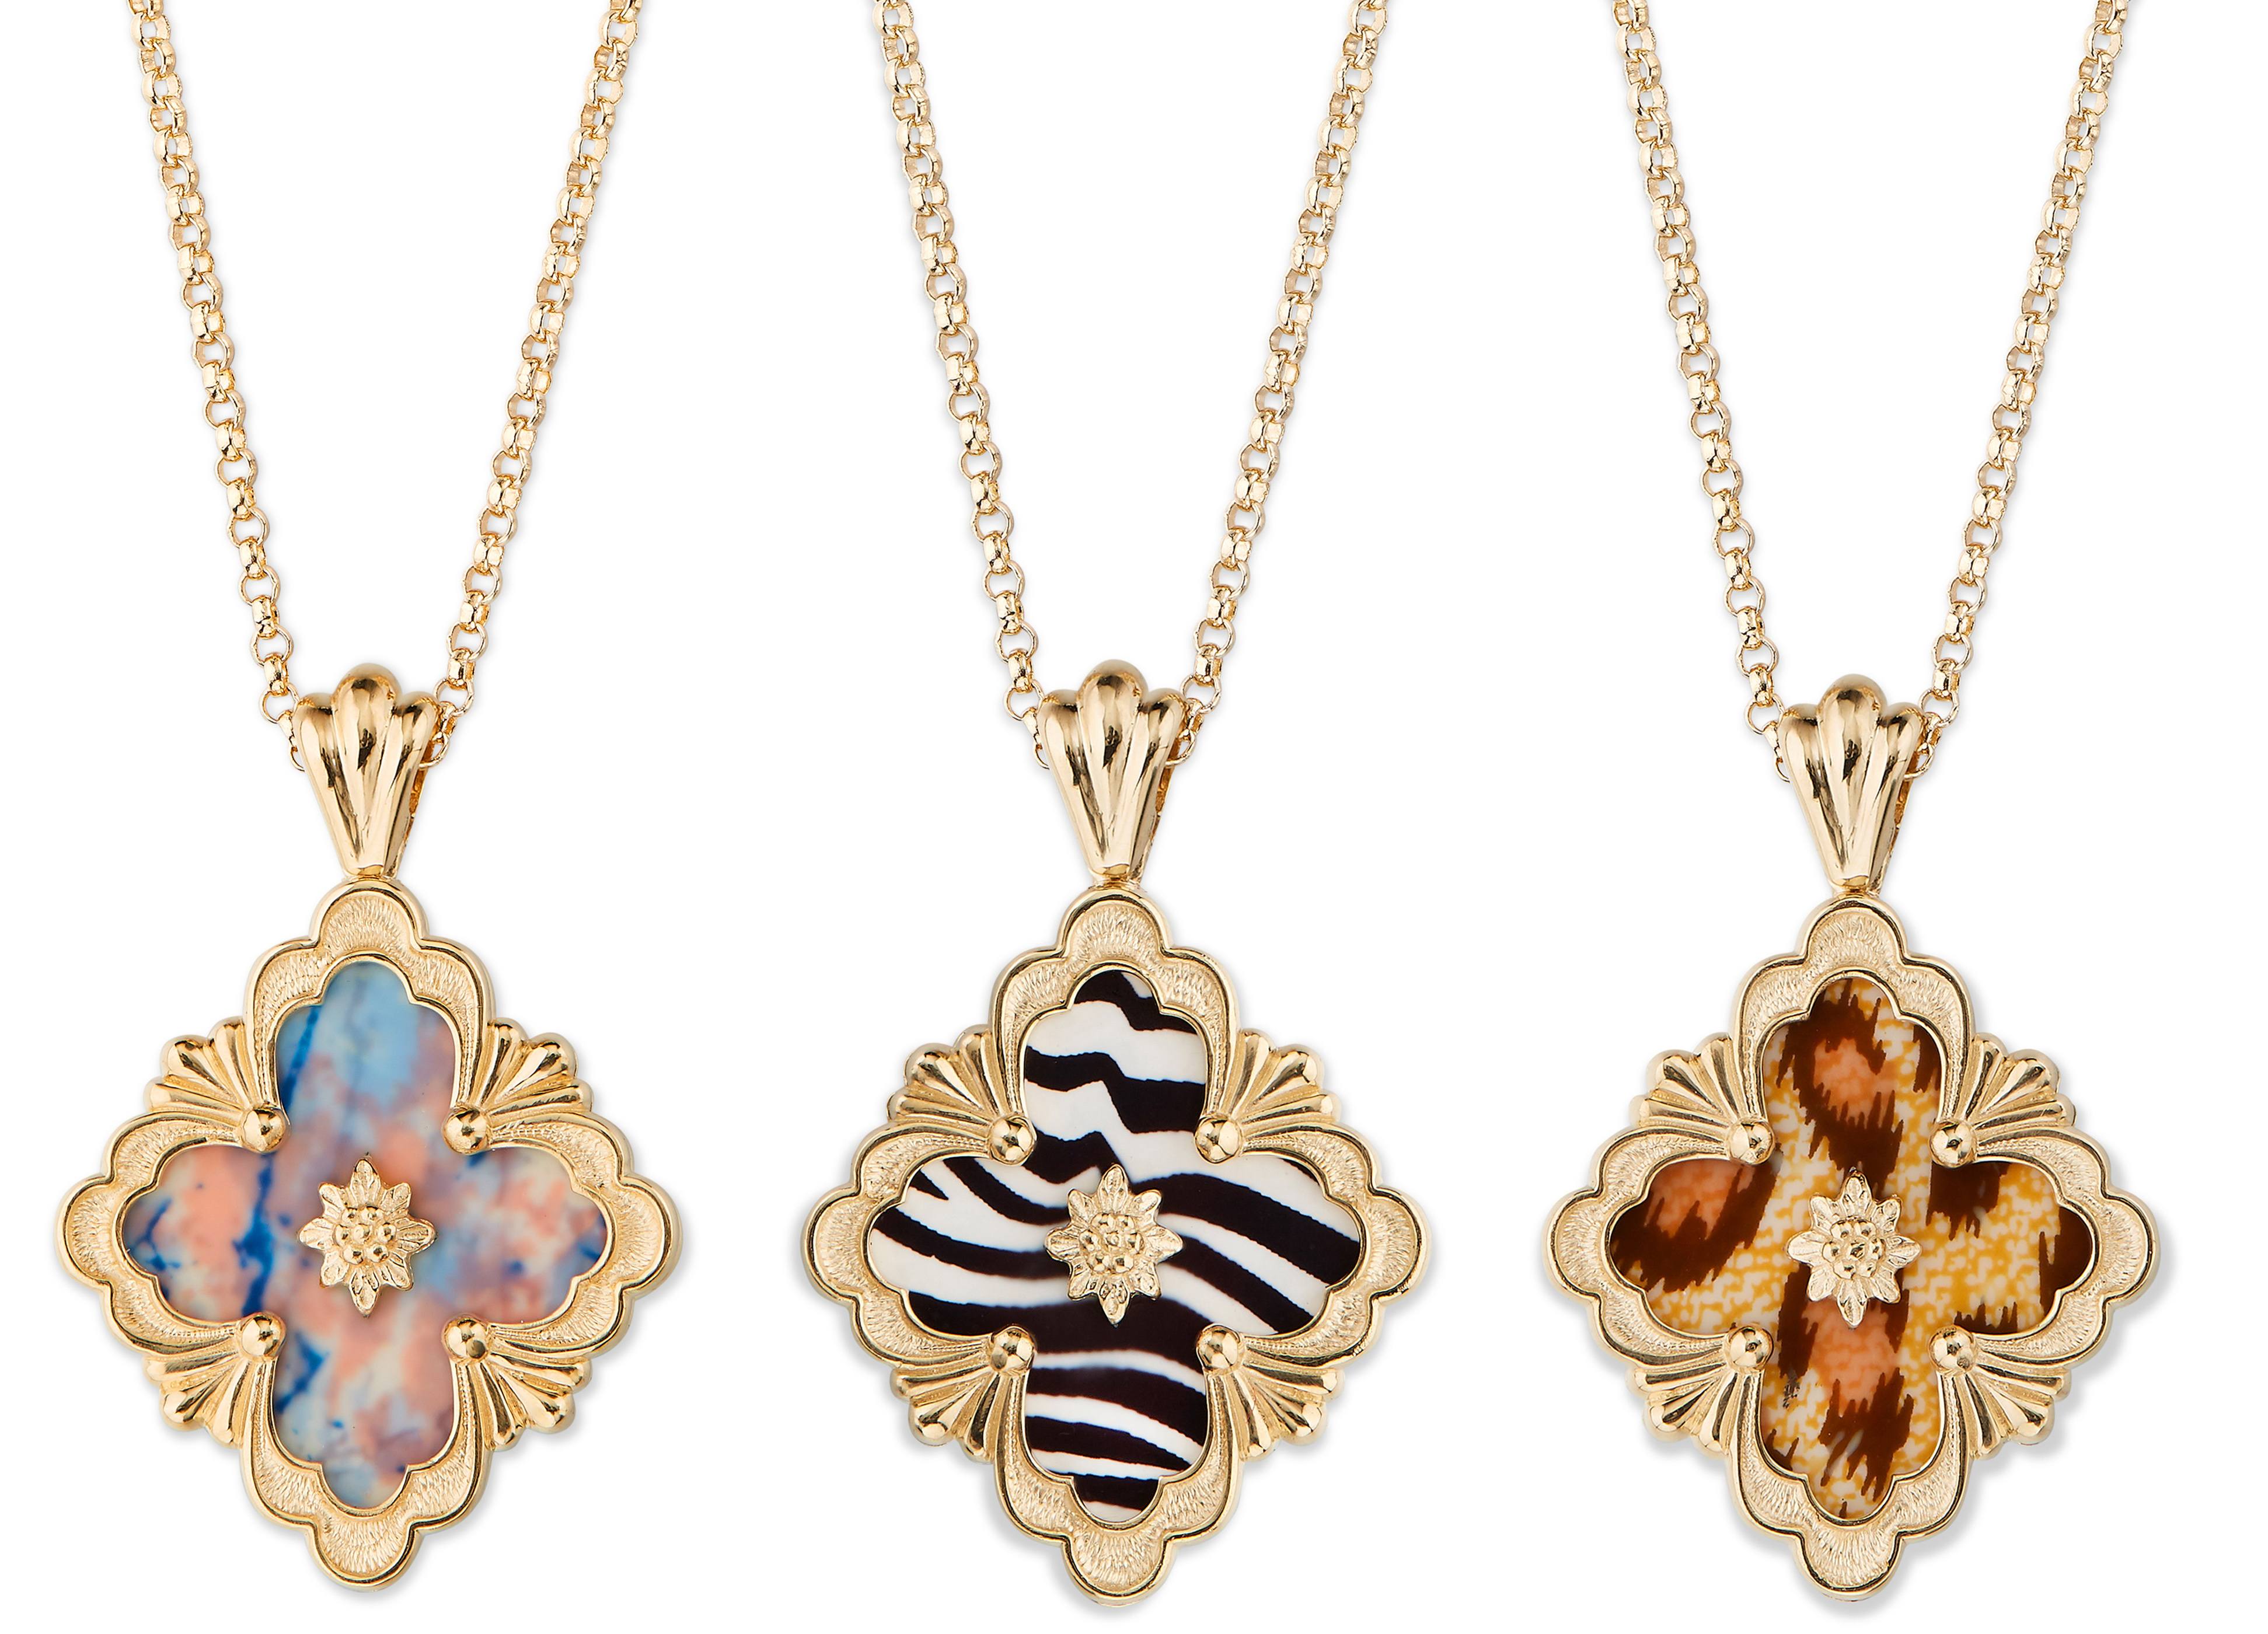 Buccellati limited edition Opera Collection pendants, left to right: marble, zebra and leopard design